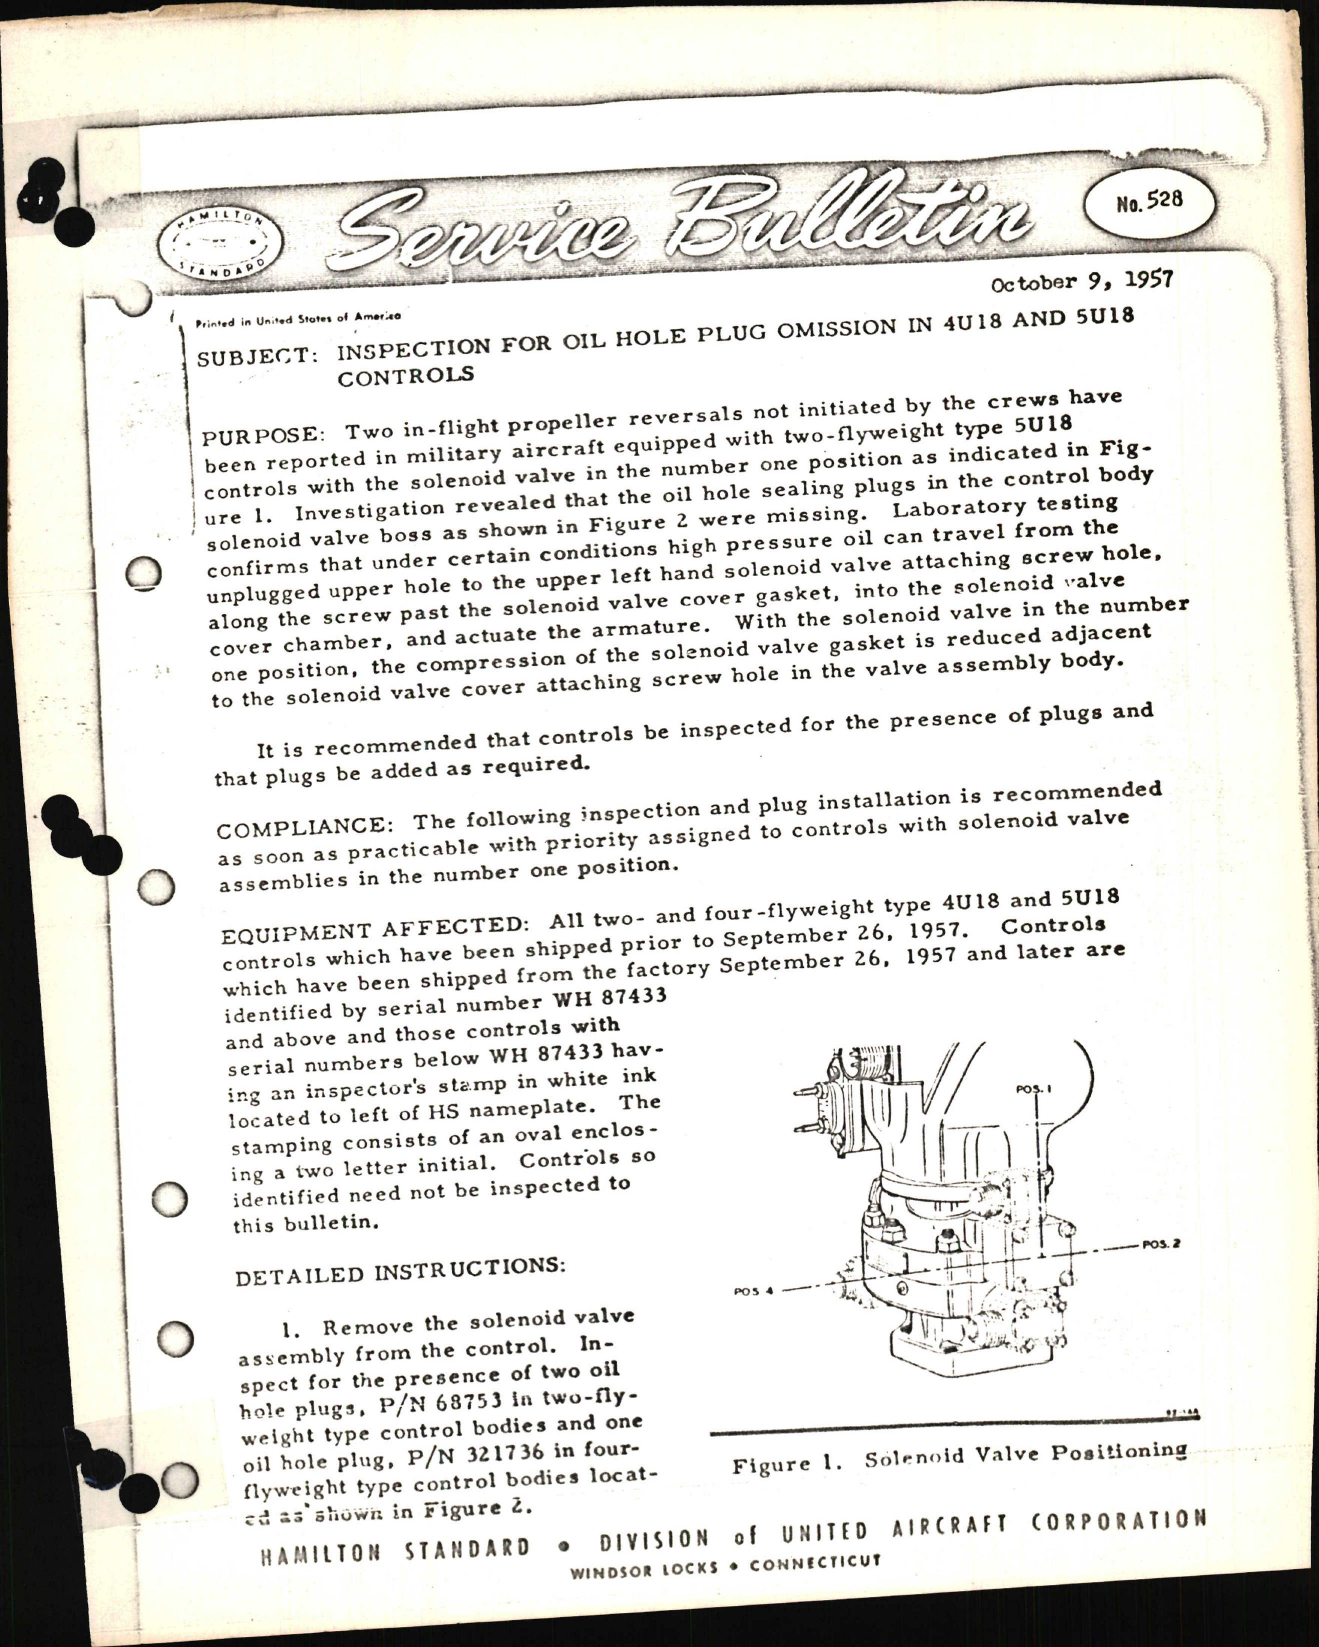 Sample page 1 from AirCorps Library document: Inspection for Oil Hole Plug Omission in 4U18 and 5U18 Controls